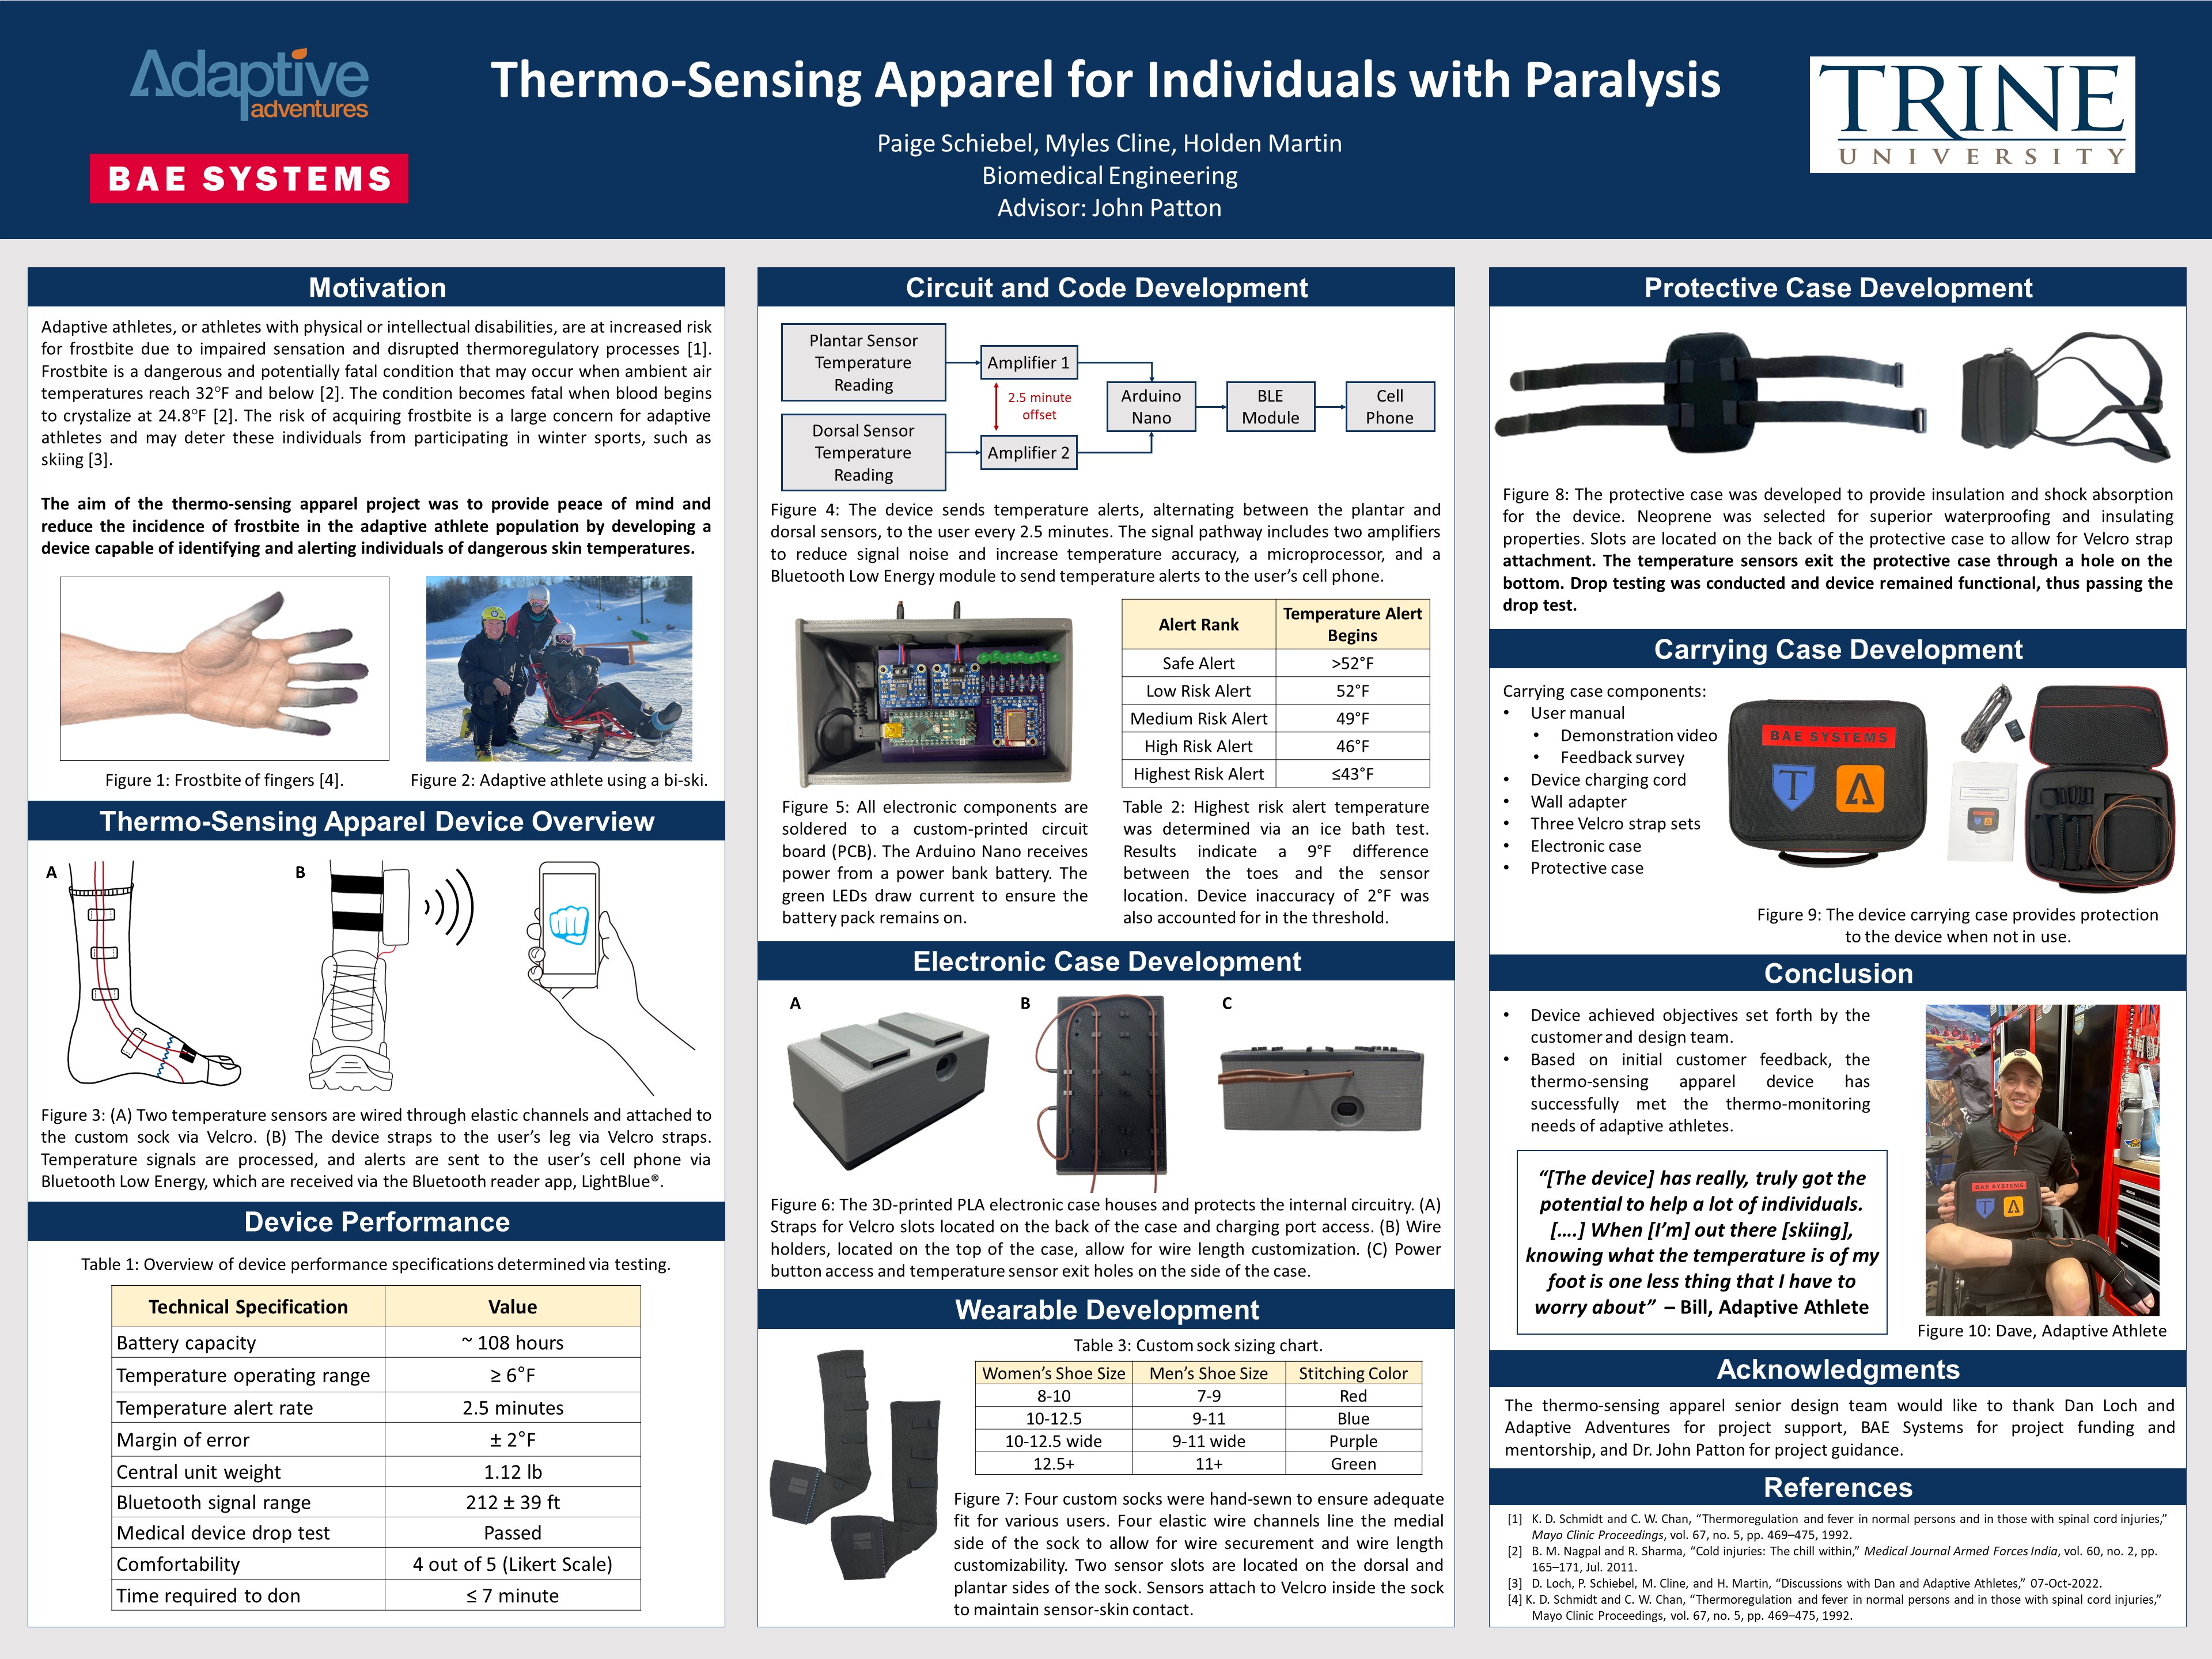 Thermo-Sensing Apparel for Individuals with Paralysis